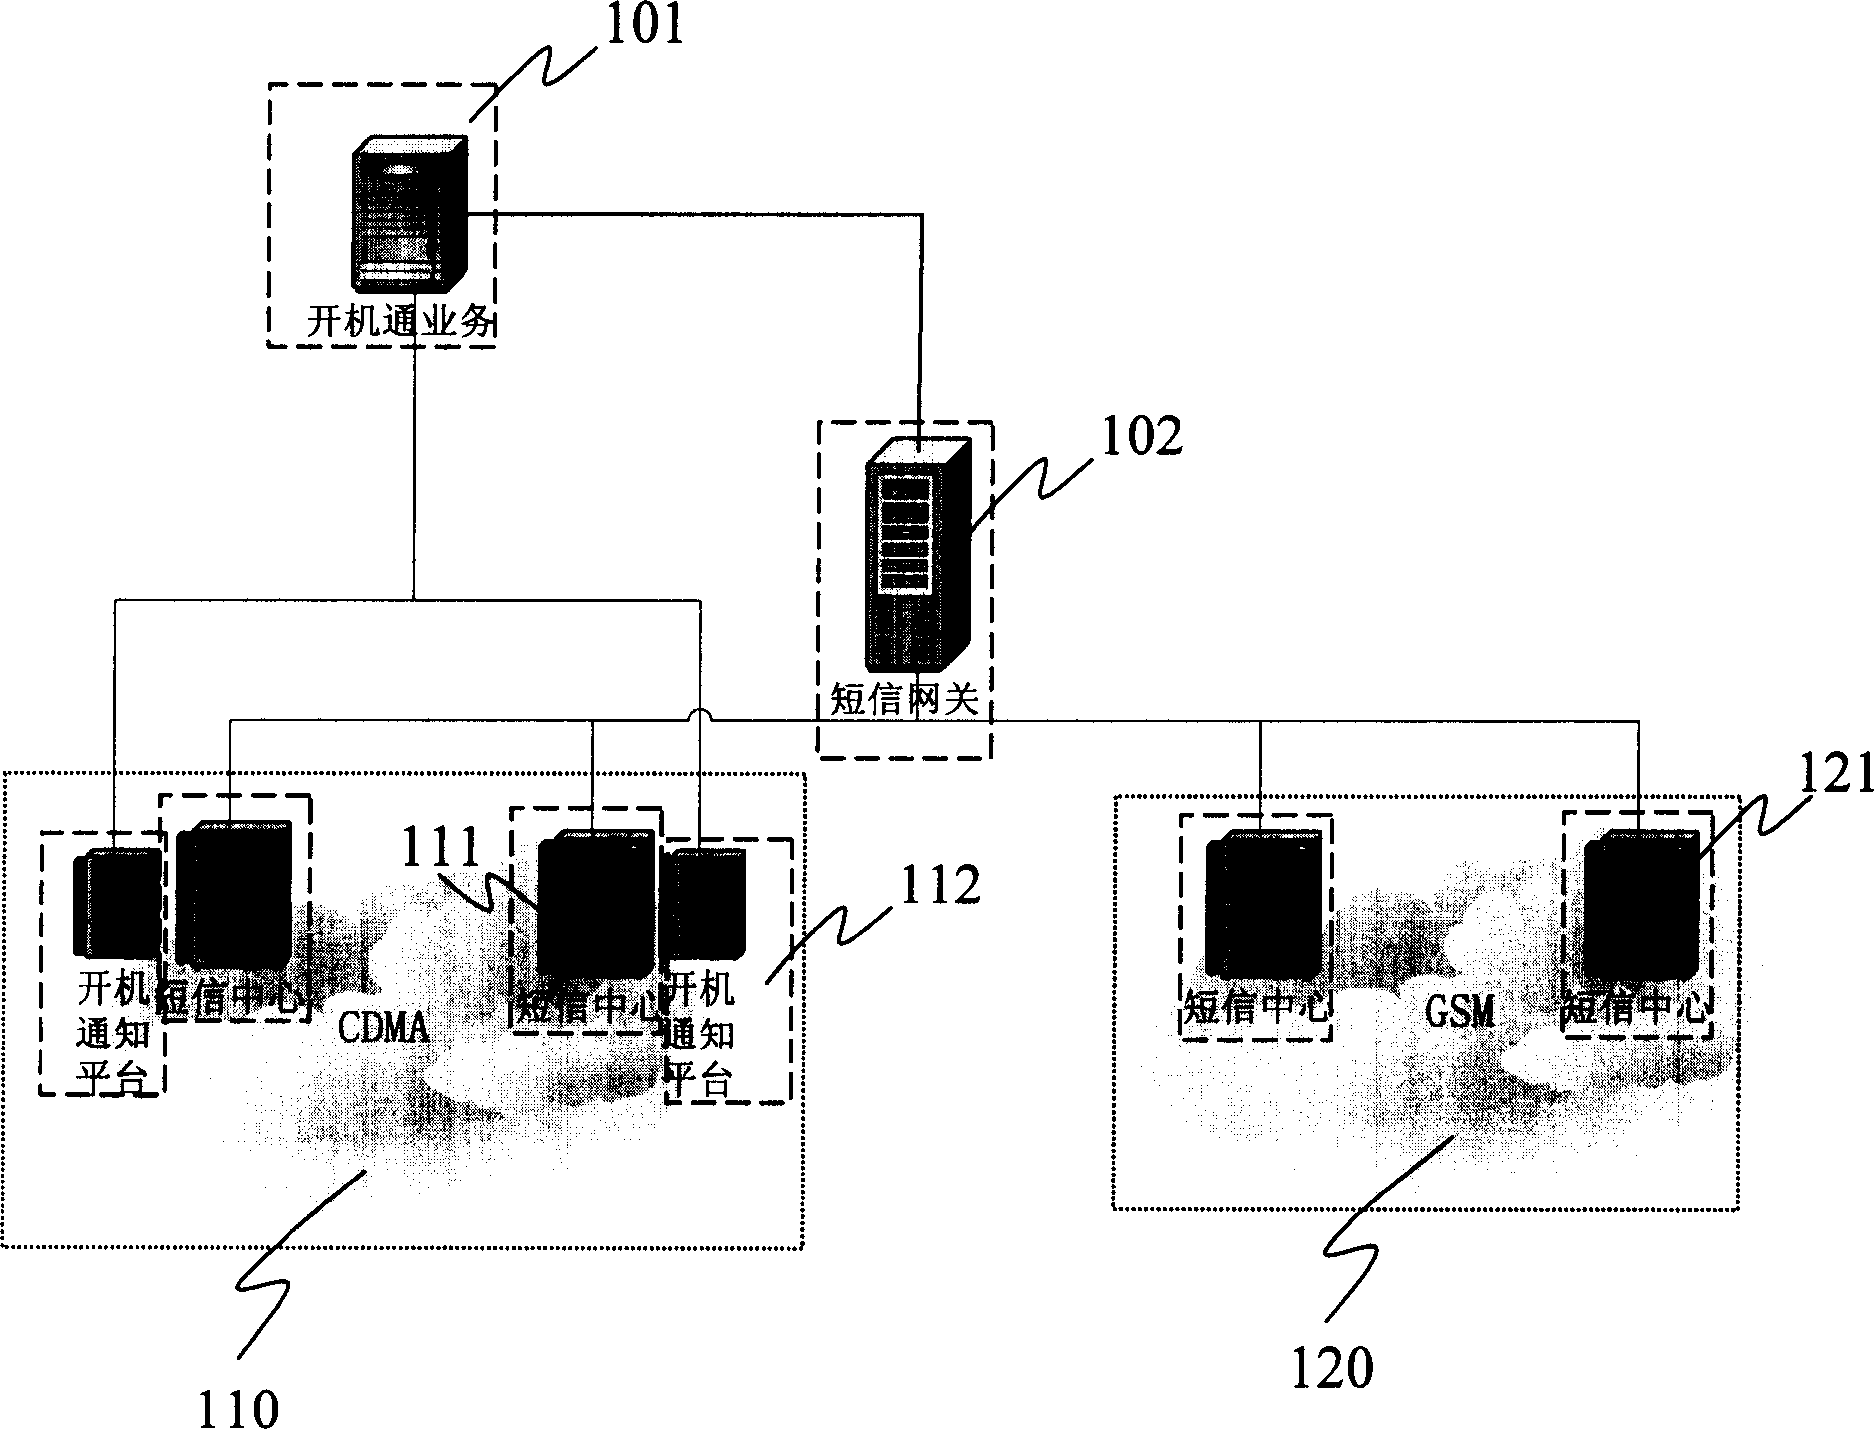 Method for realizing access once starting machine